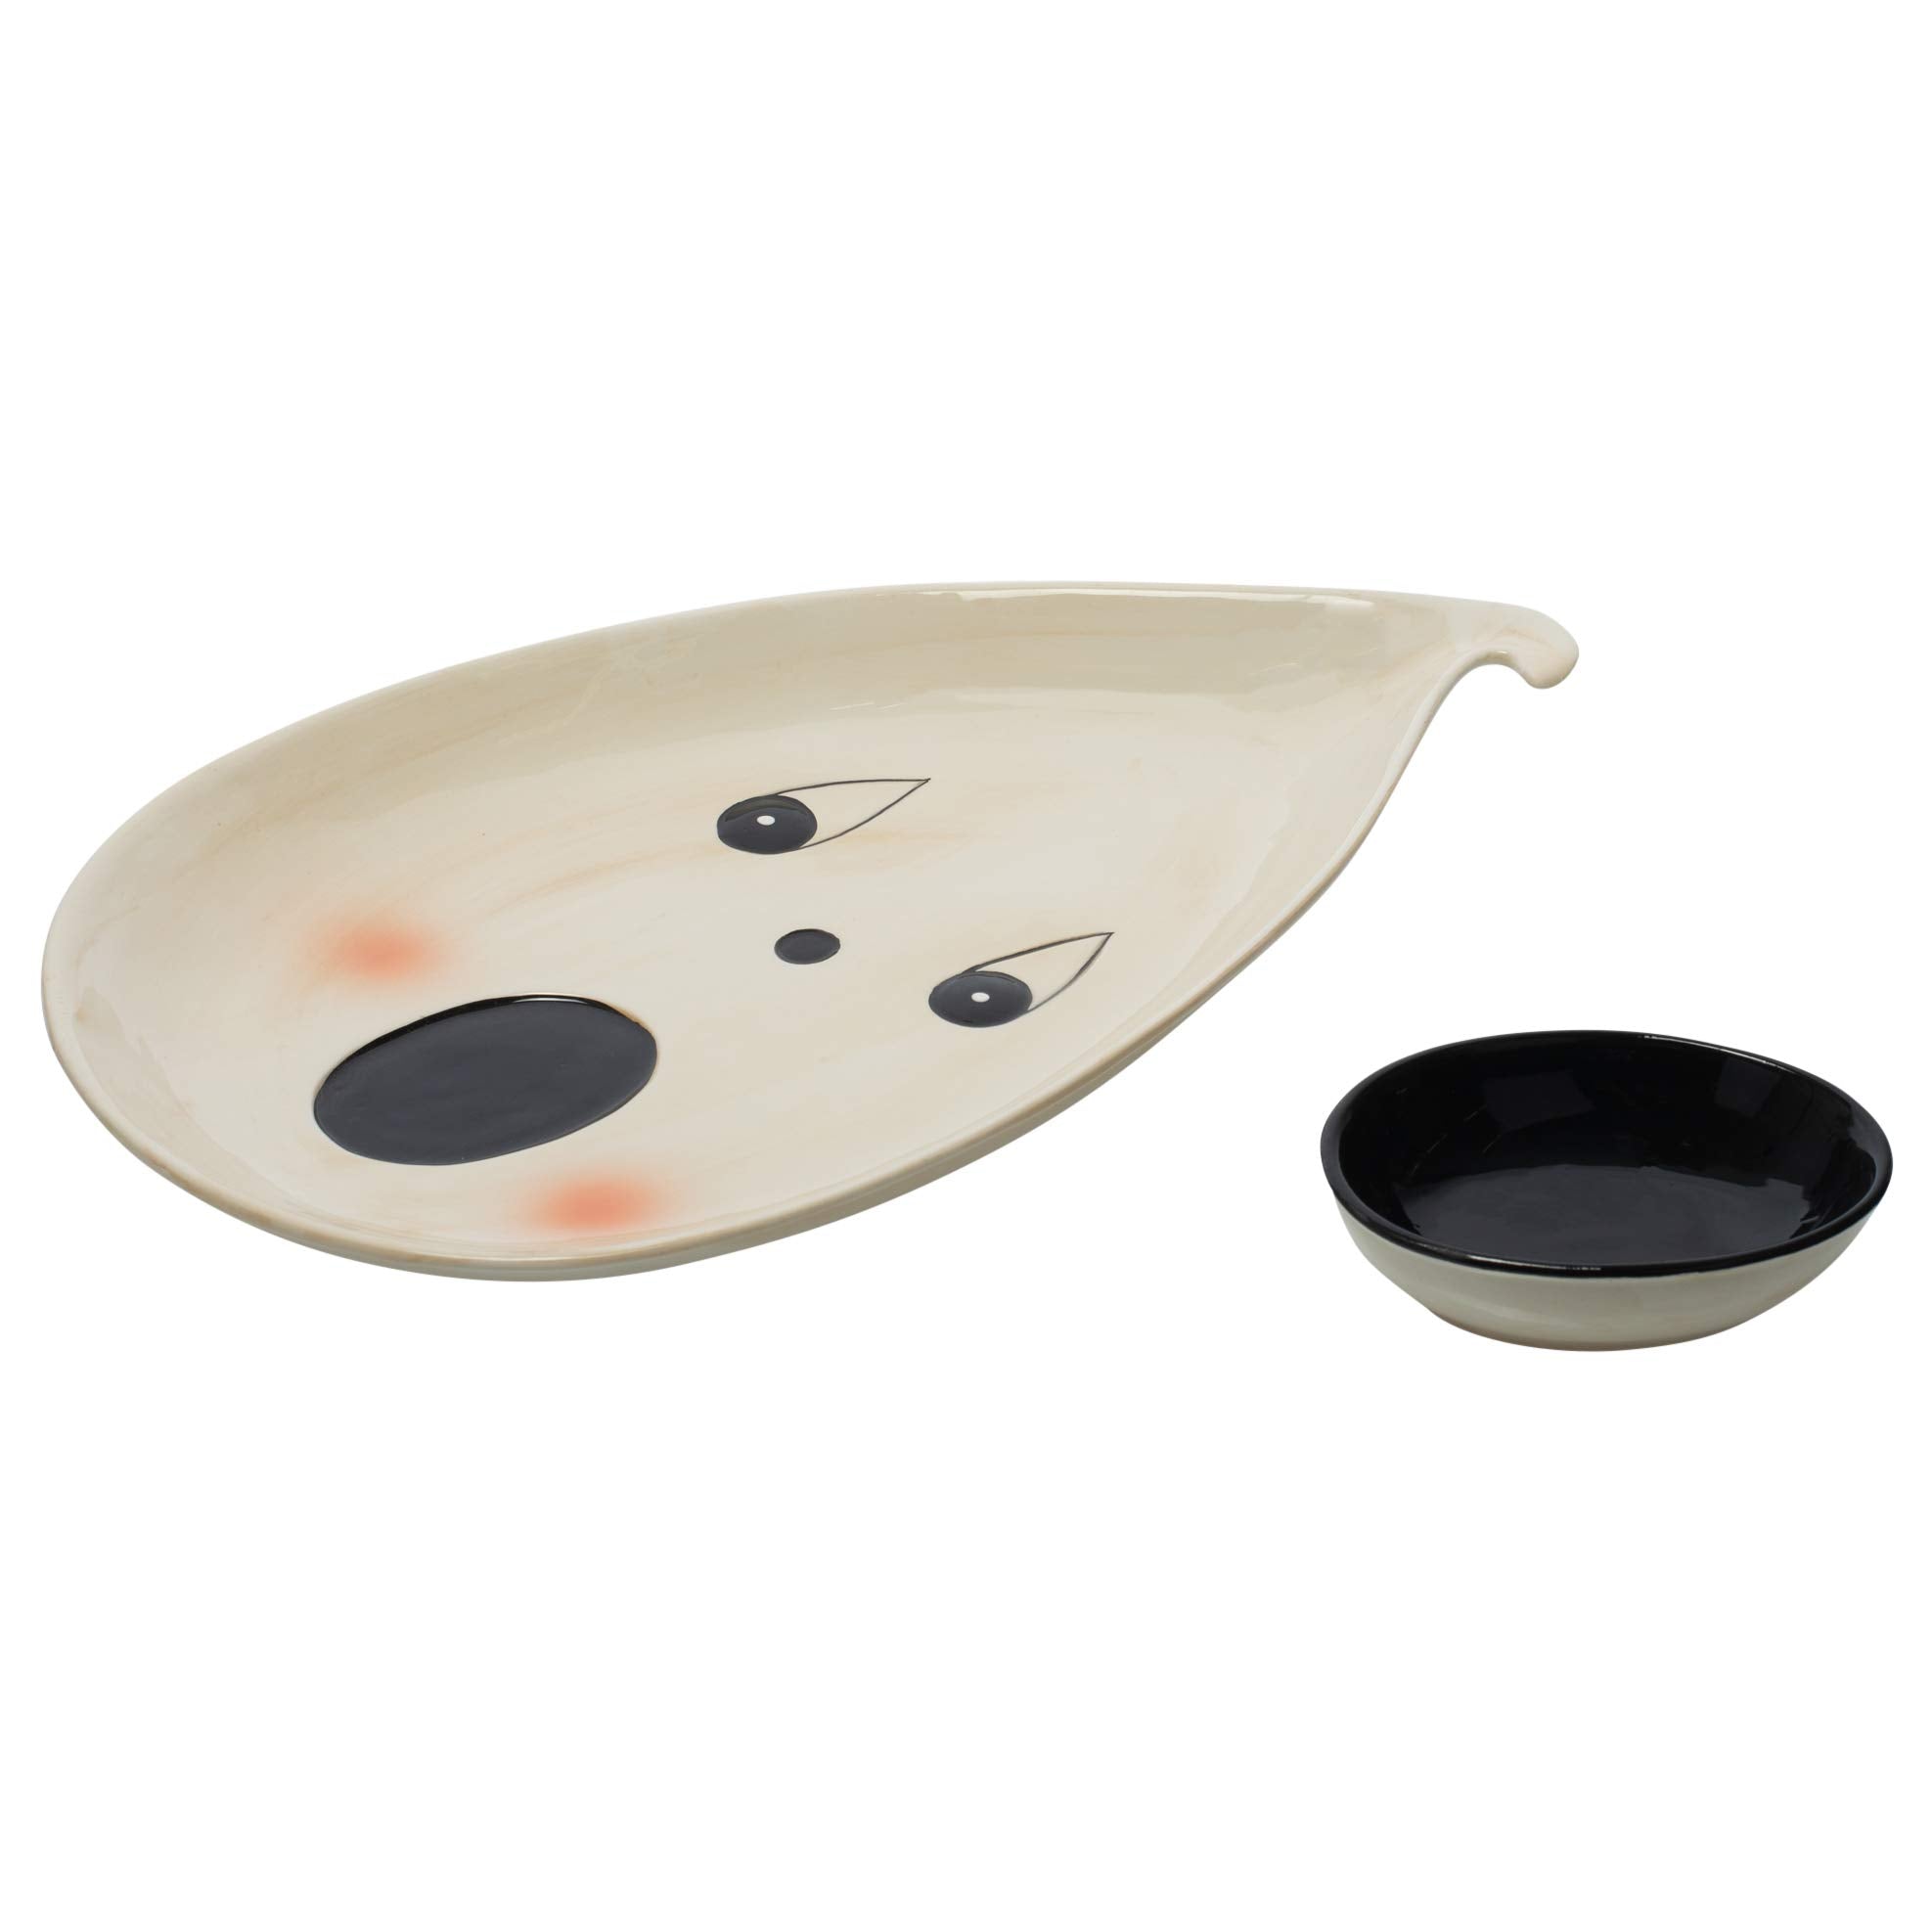 Transpac Imports, Inc. Dip-a-Boo Ghost Glossy White 15 x 9 Dolomite Halloween Serving Platter Set